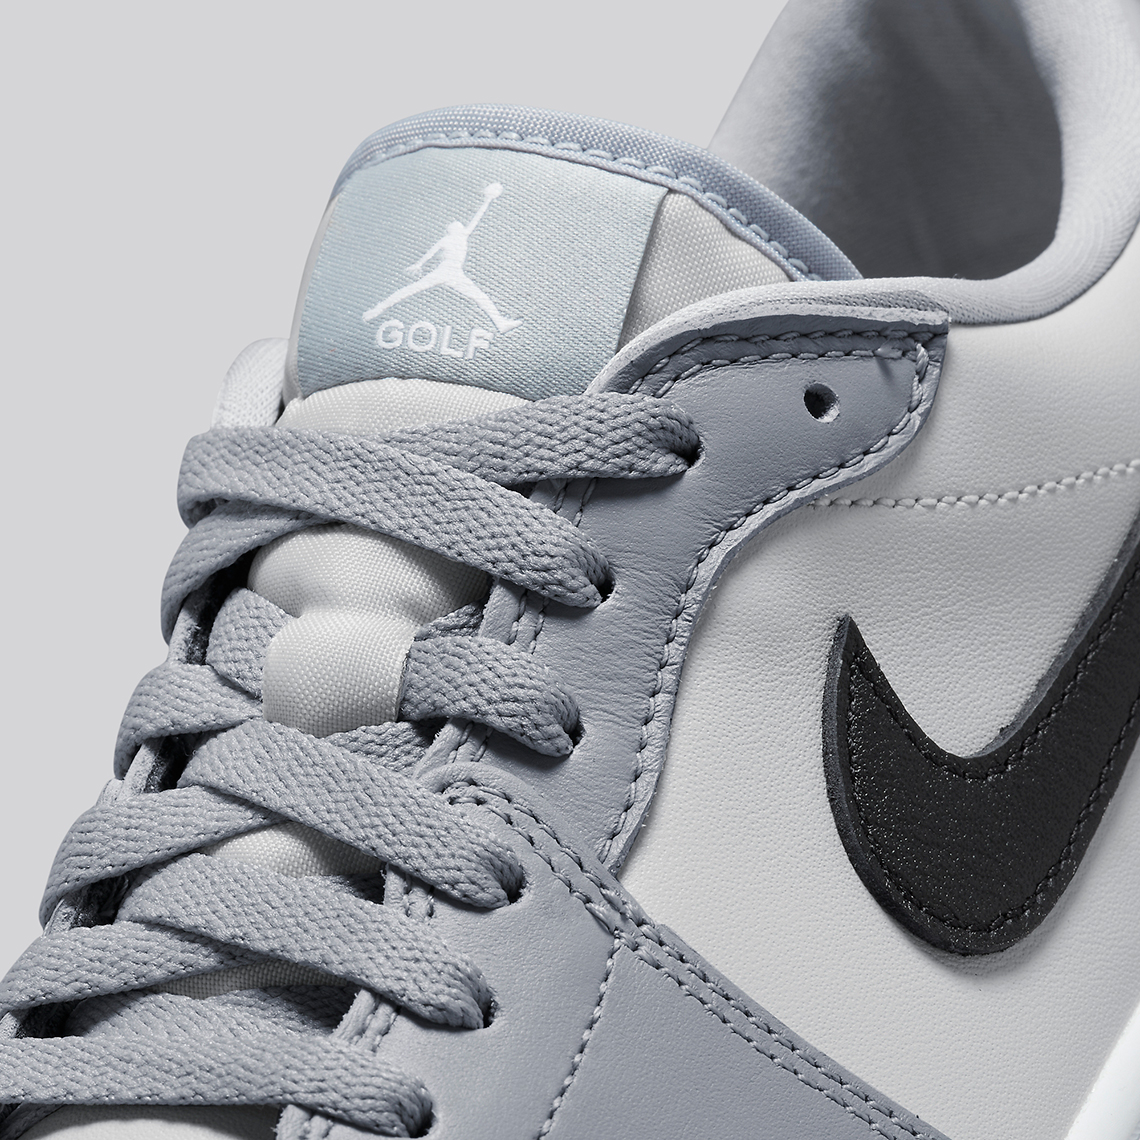 The Air jordan High 1 Elevate Low "Atmosphere" is a brand new women's Golf Wolf Grey Dd9315 002 8